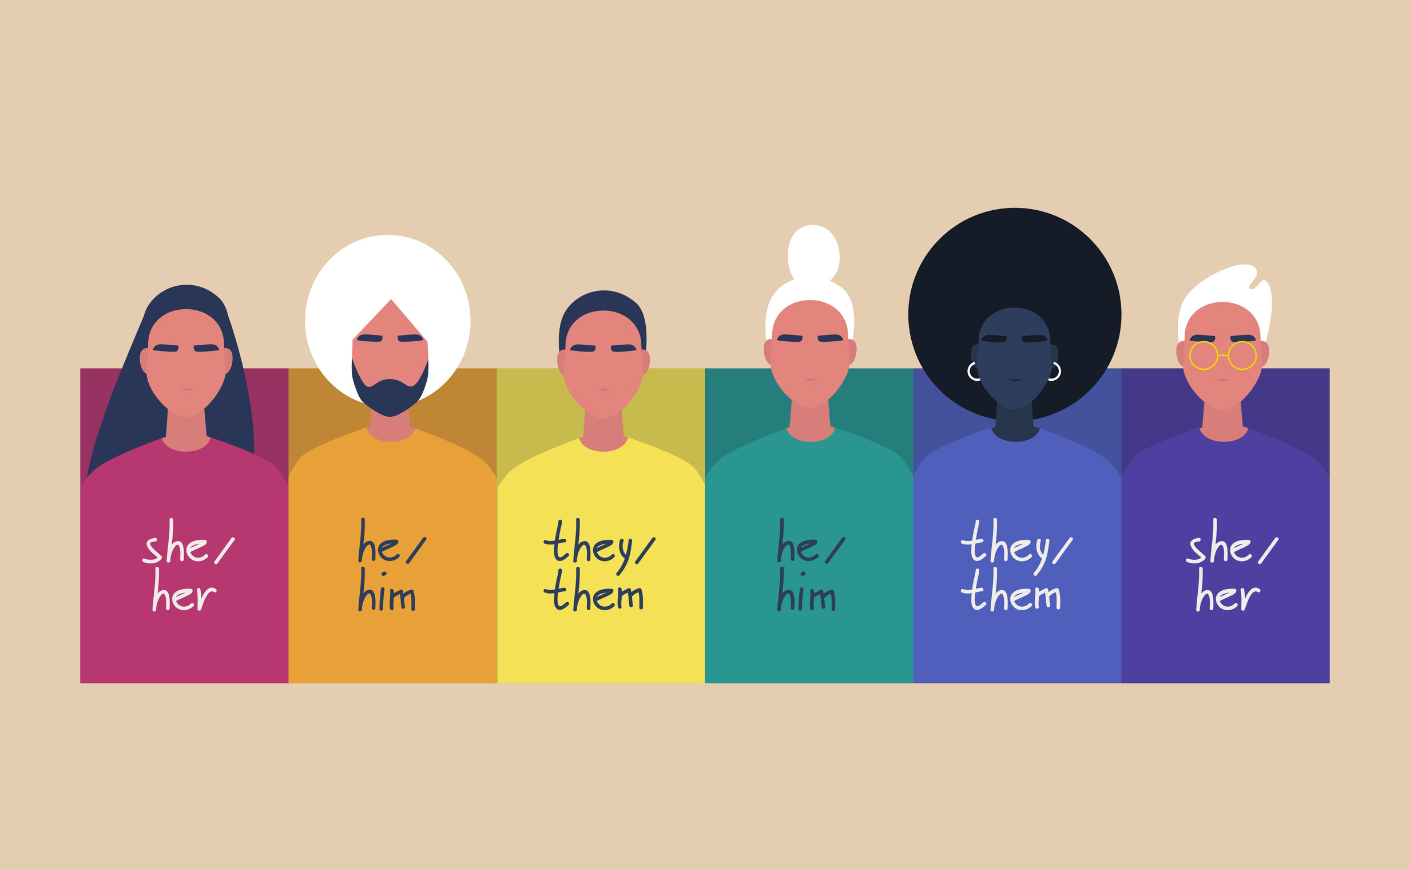 Illustration of people labeled by their proper pronouns of he/him, she/her, or they/them